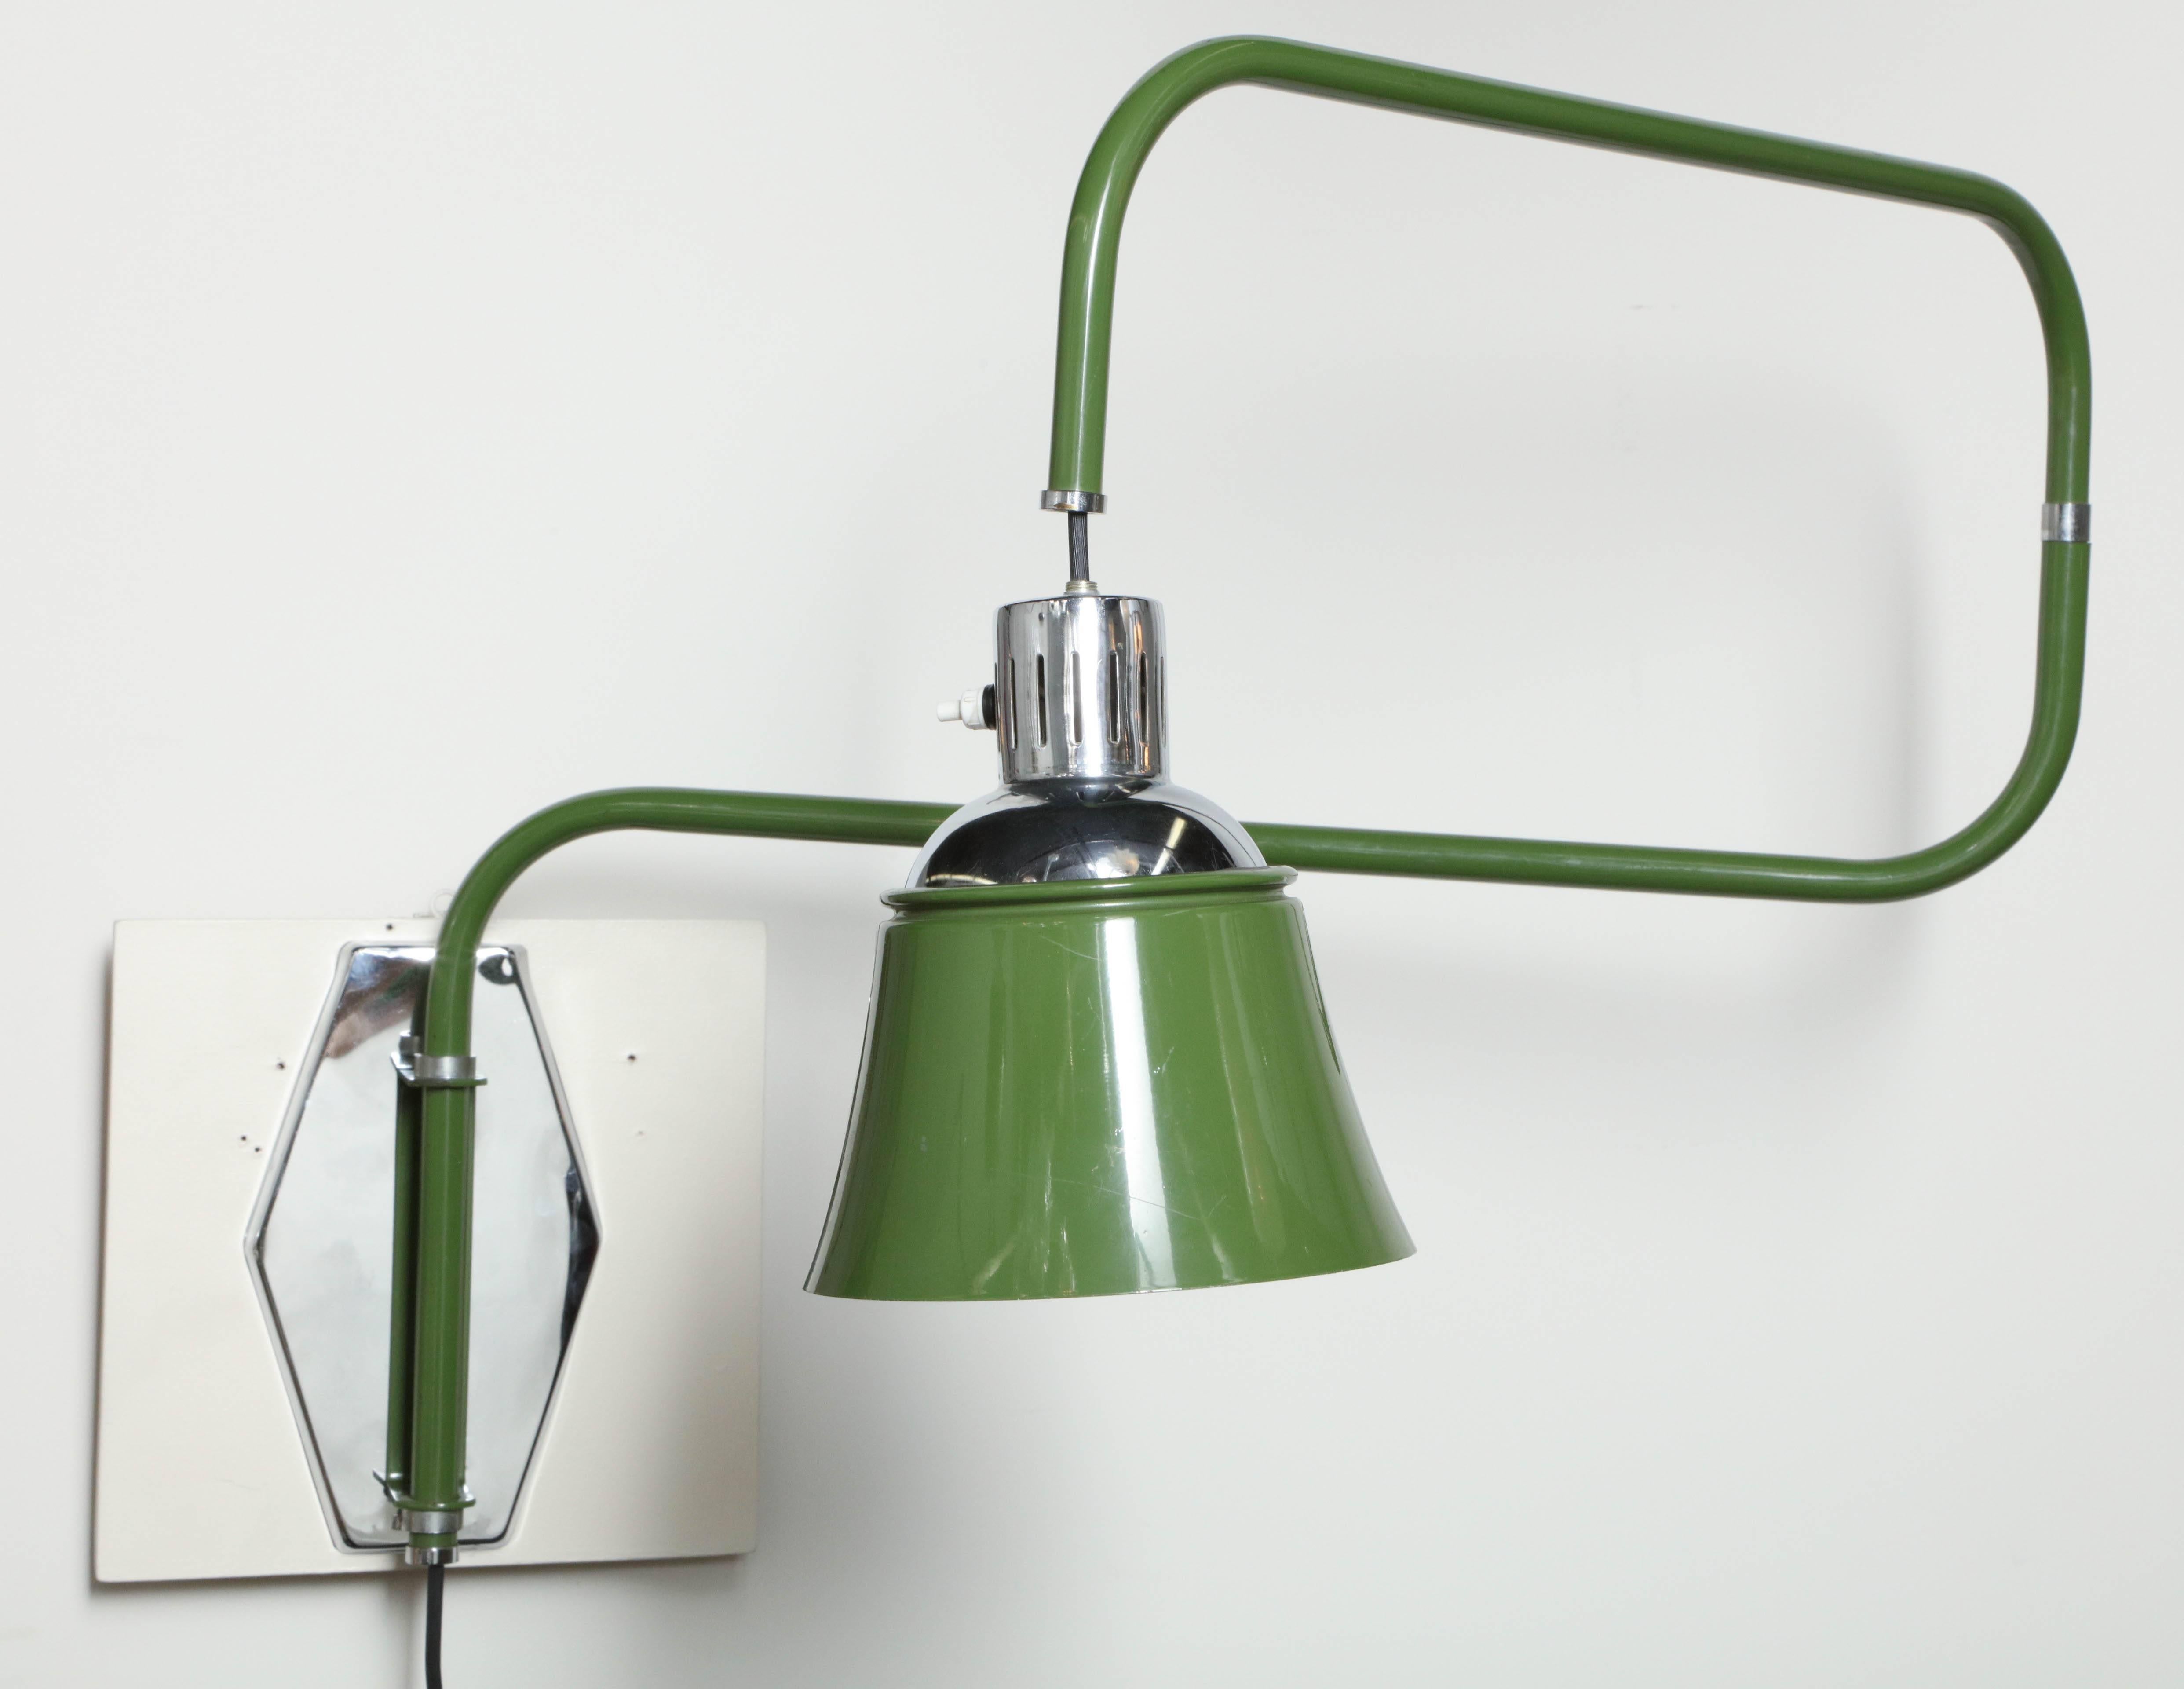 Bauhaus / art deco swing arm wall light designed by Heinrich Siegfried Bormann in 1930 who was a designer for the Bauhaus. Adjustable pull down shade that also can be adjusted to shine the light in any direction by pivoting the shade.  Made in